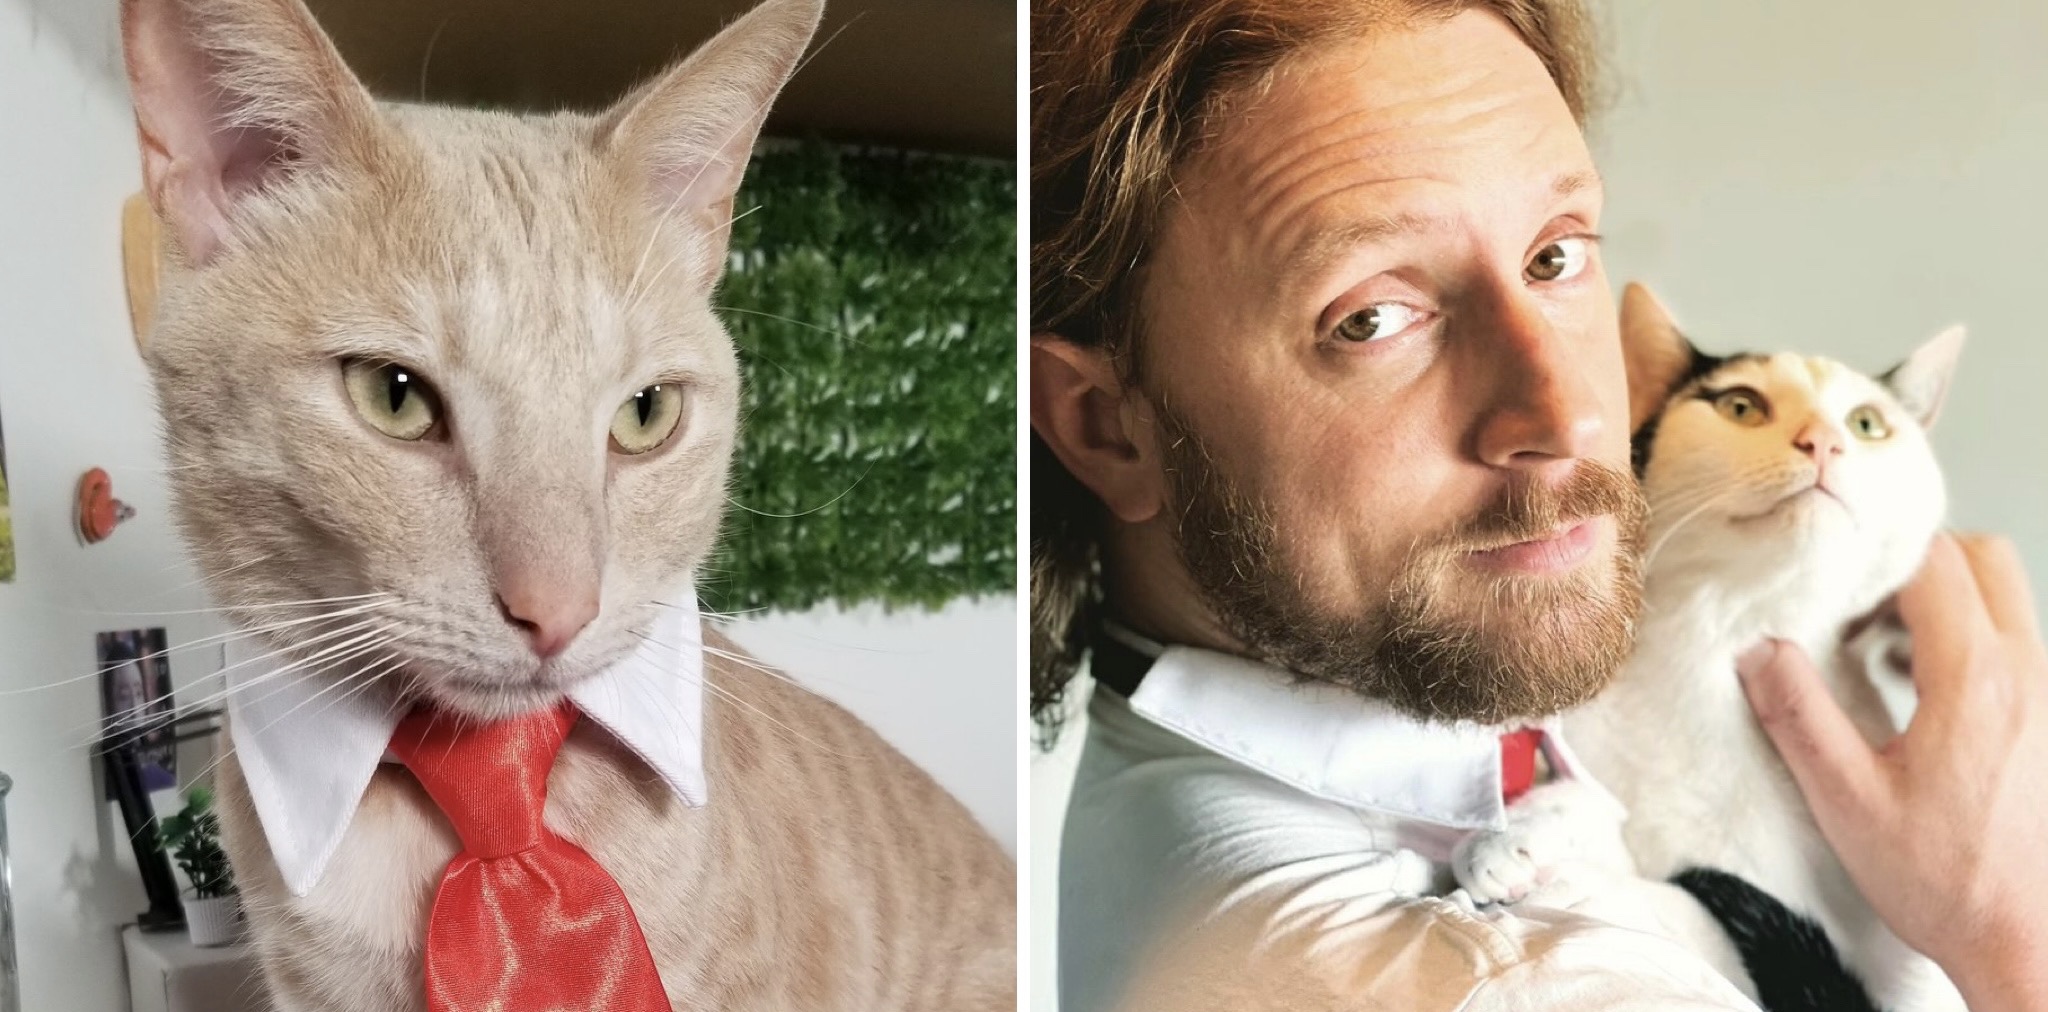 We spoke with Drennon Davis and his famous Business Cats